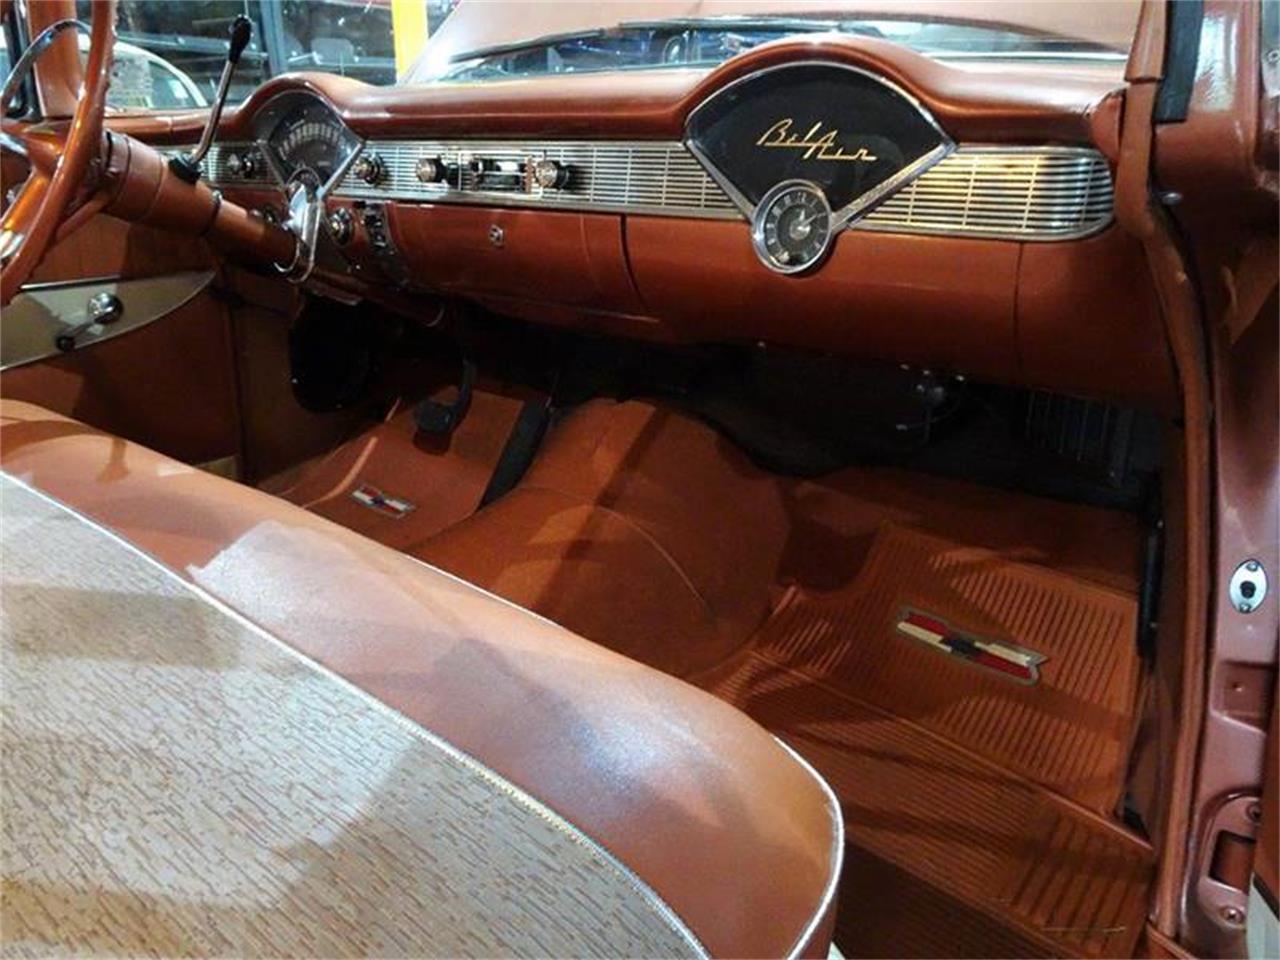 1956 Chevrolet Bel Air for sale in Hilton, NY – photo 74